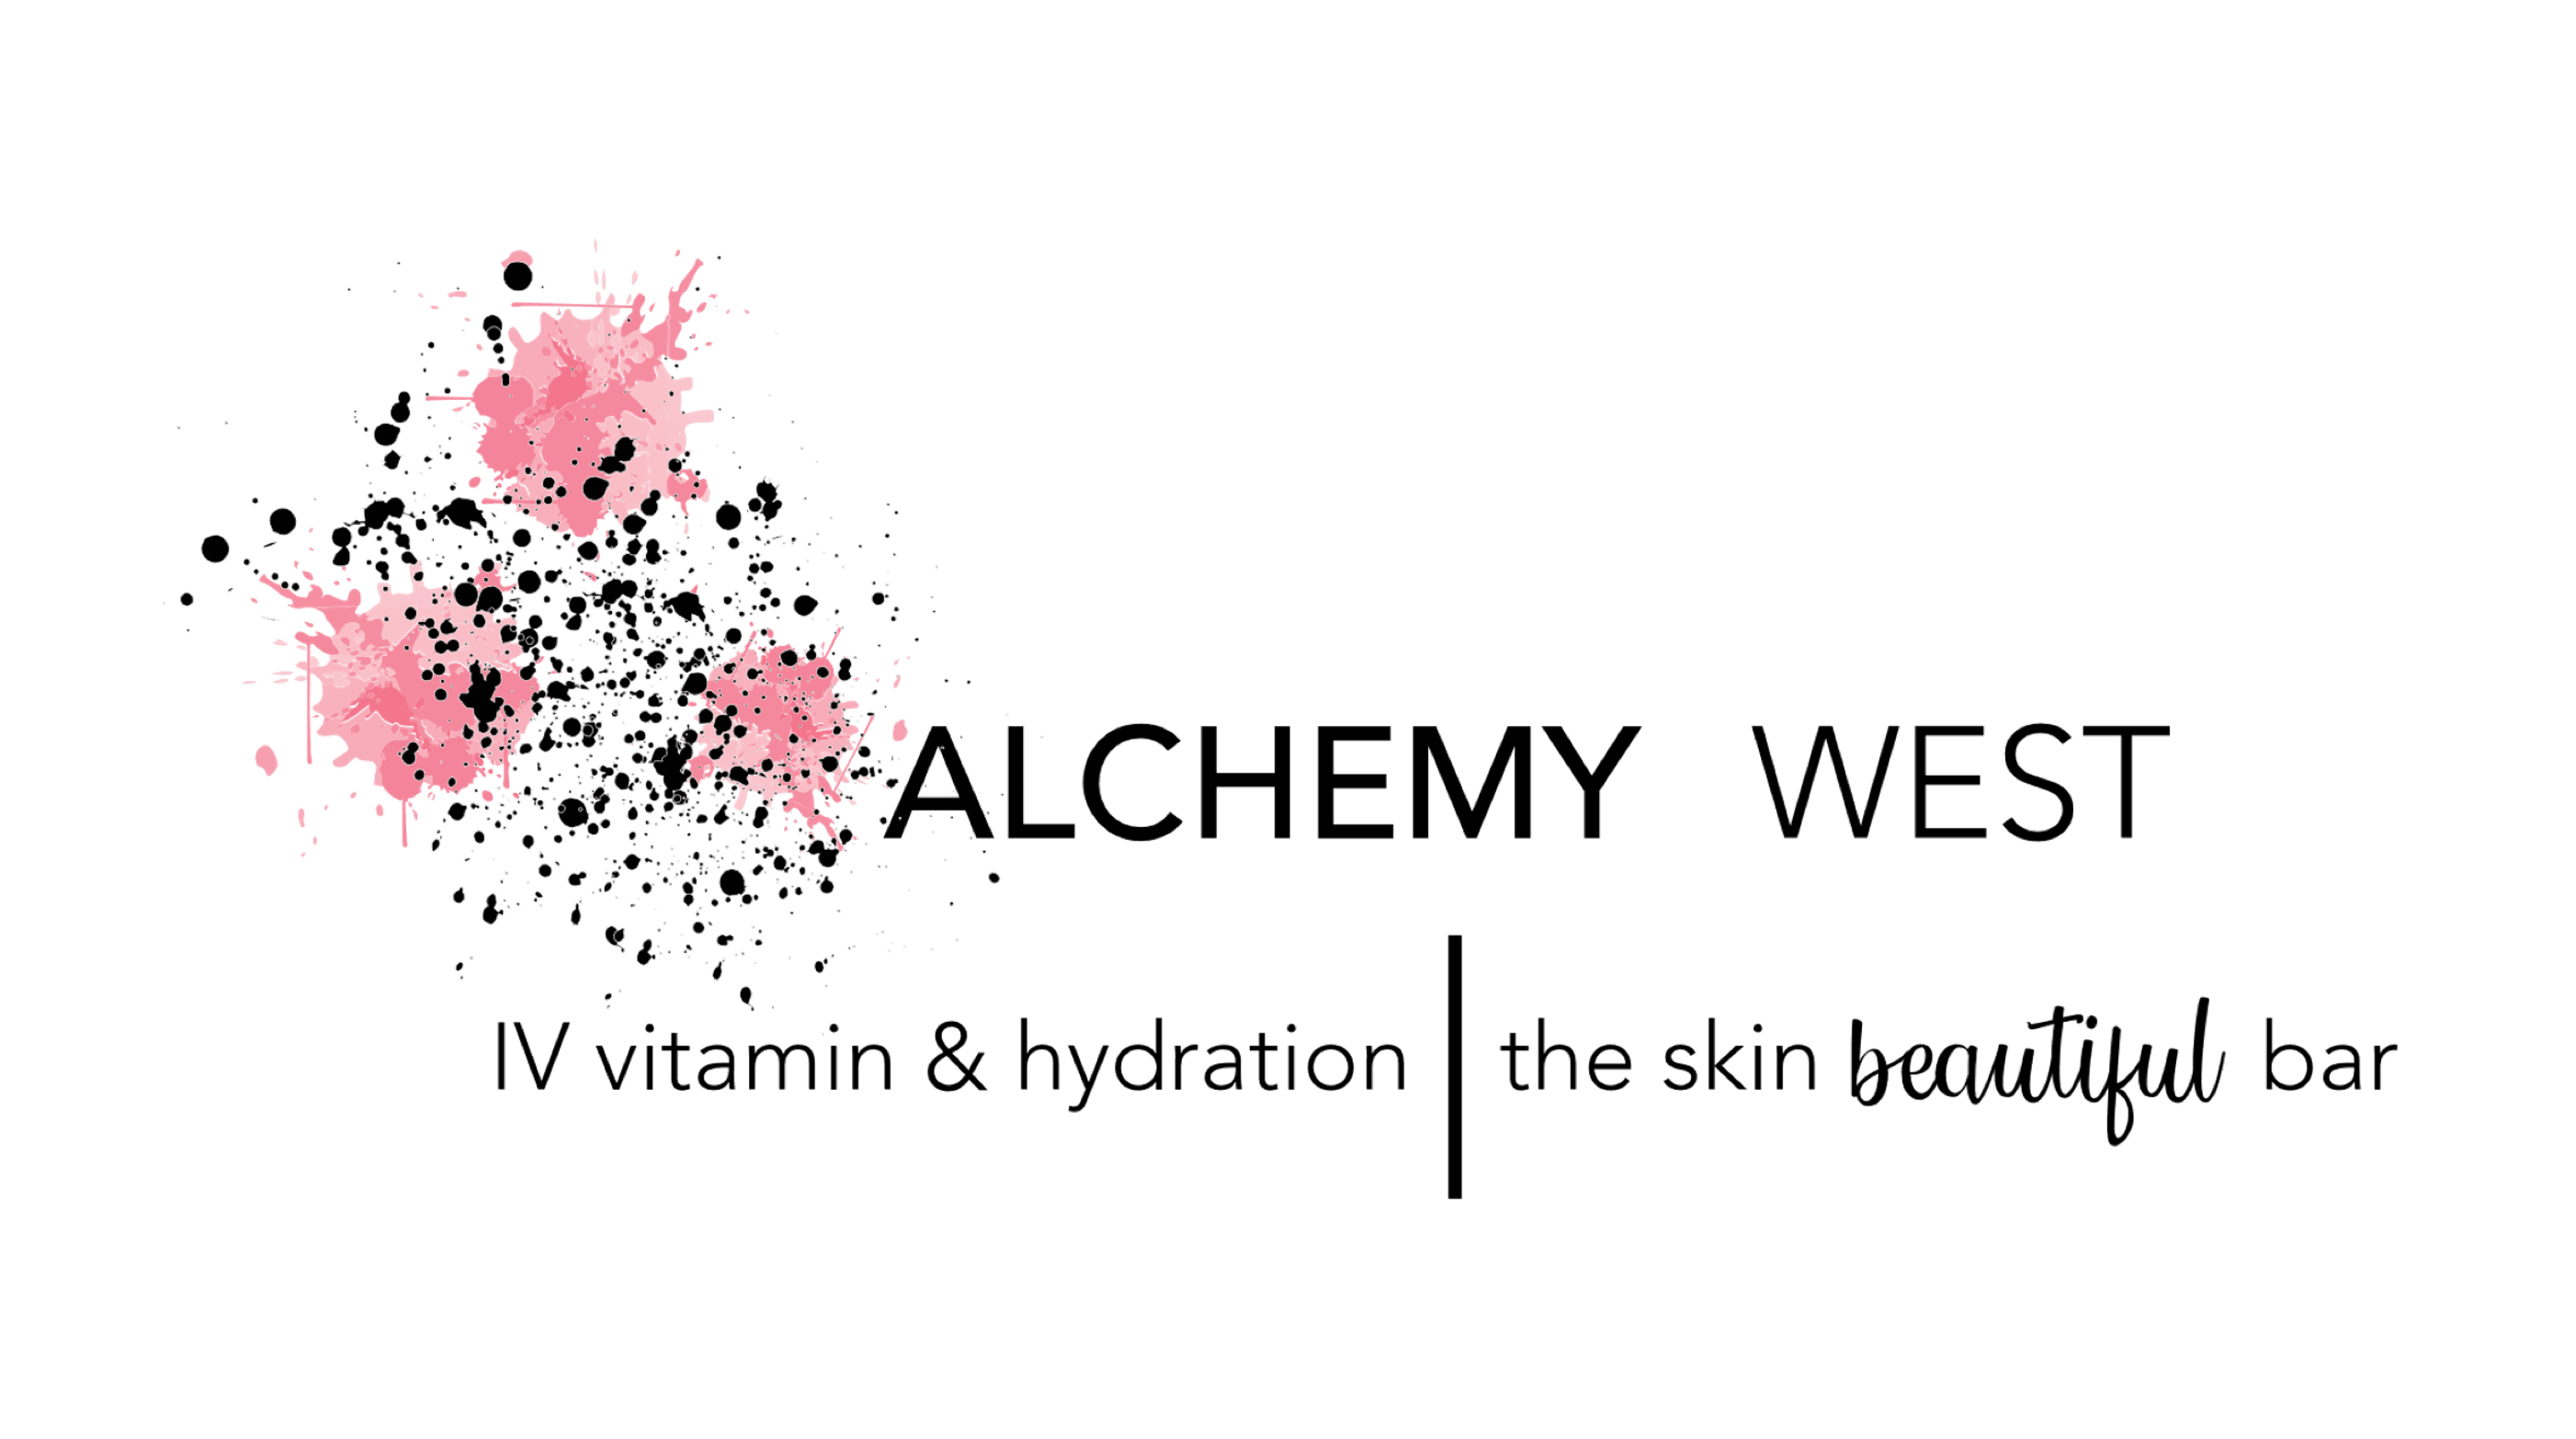 Picture-alchemy iv vitamin and hydration the beautiful bar